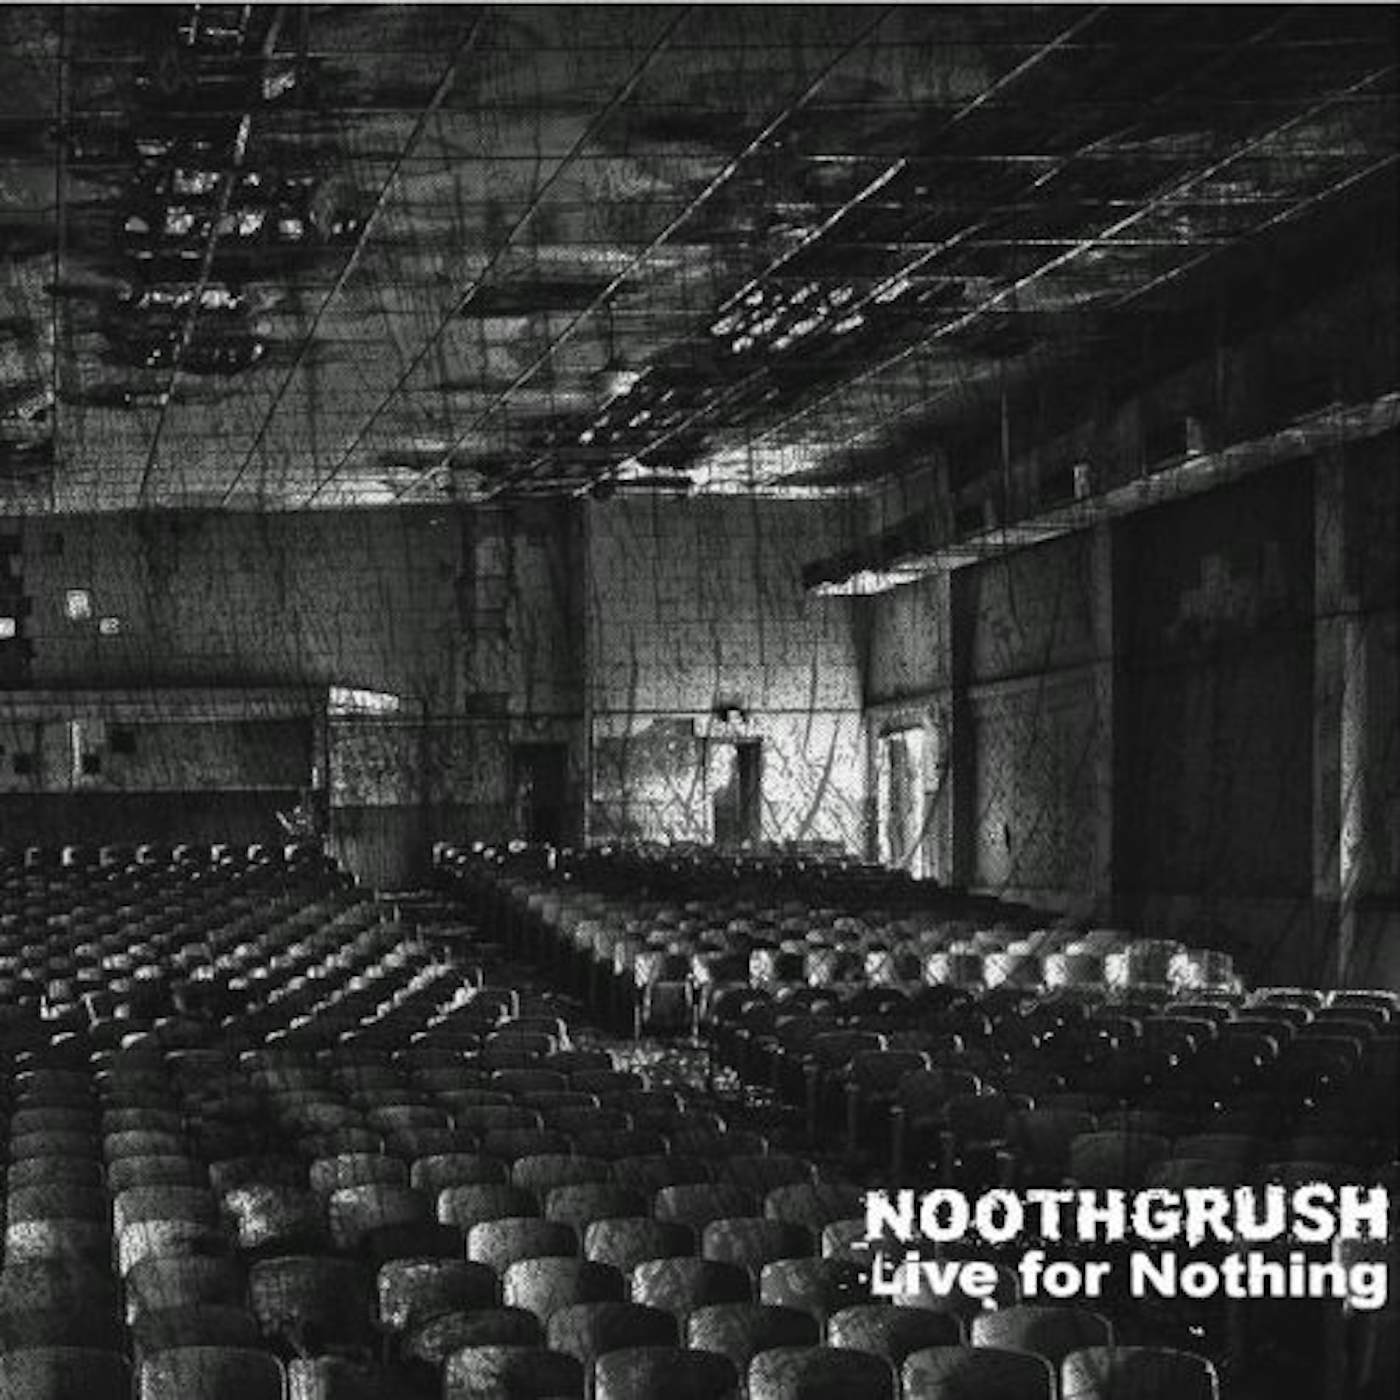 Noothgrush Live for Nothing Vinyl Record